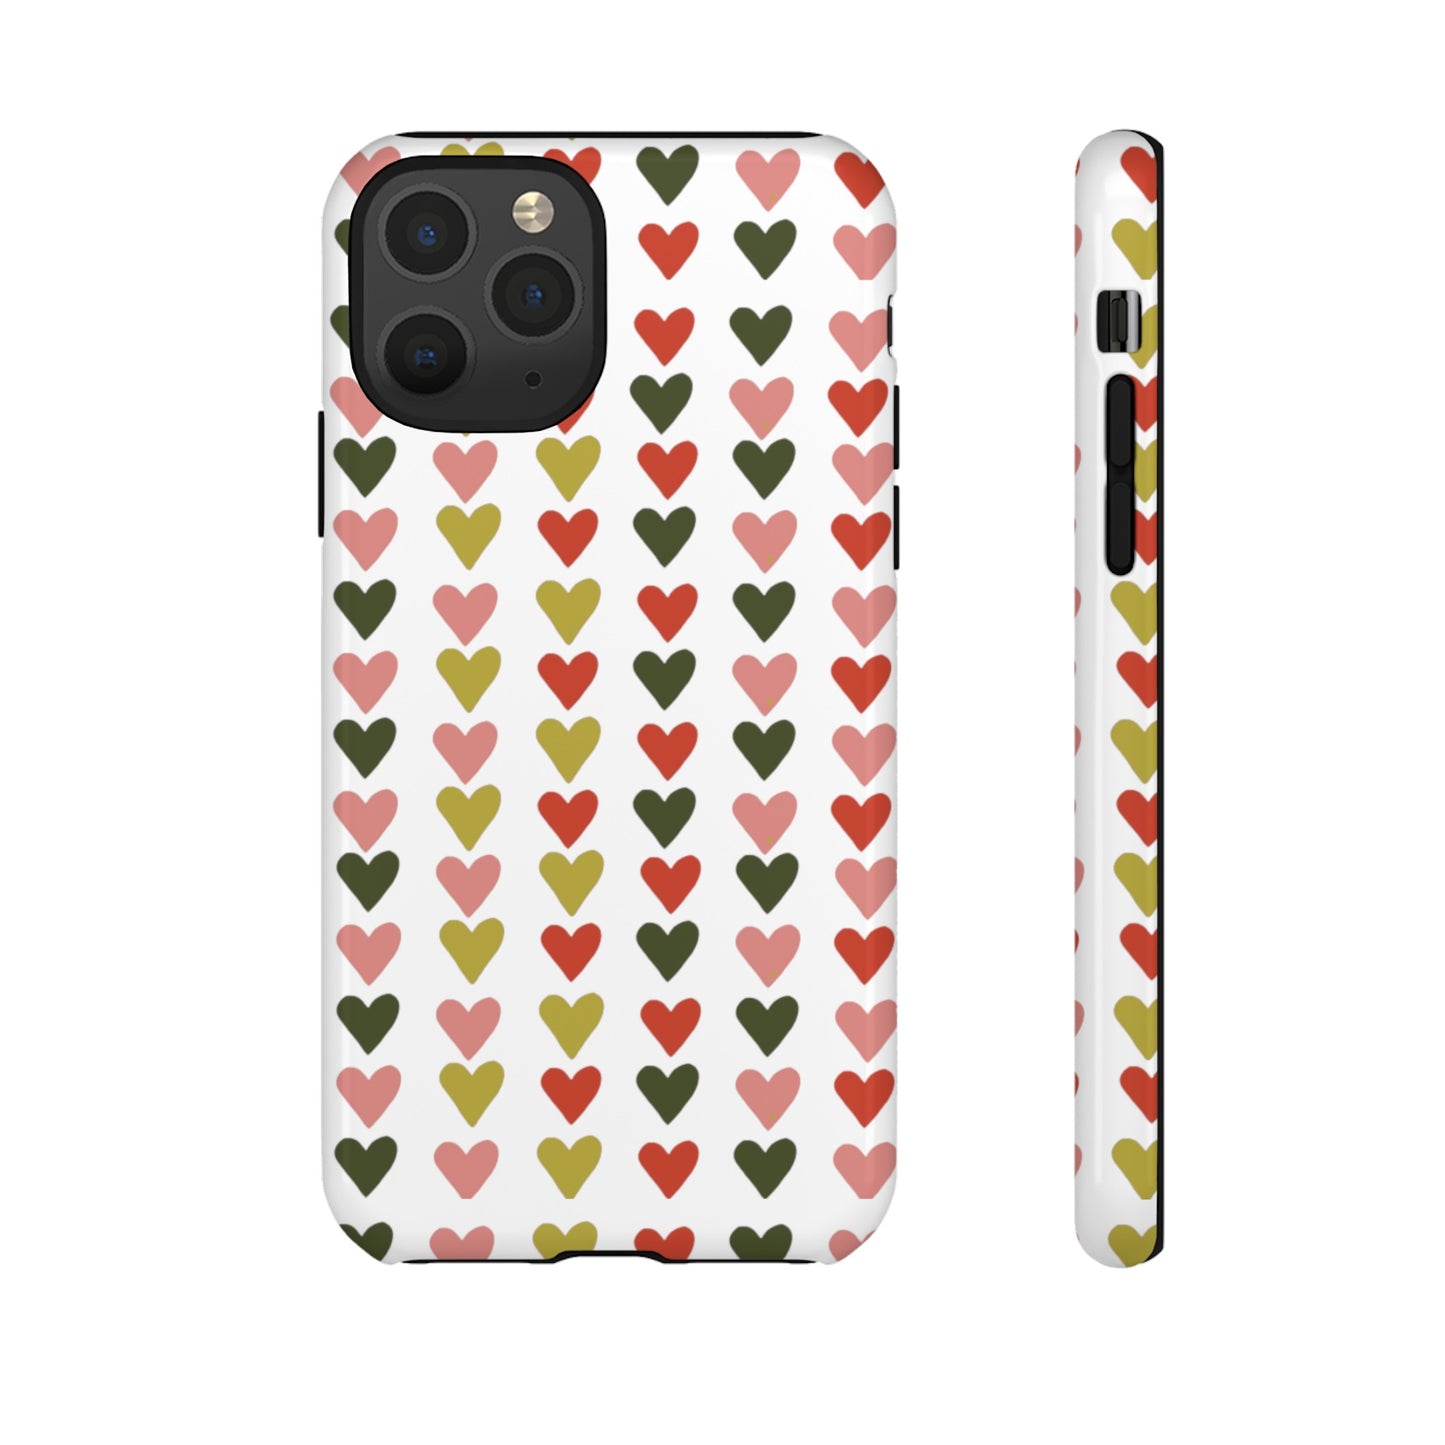 All You Need is ❤️ on White | Tough Phone Case